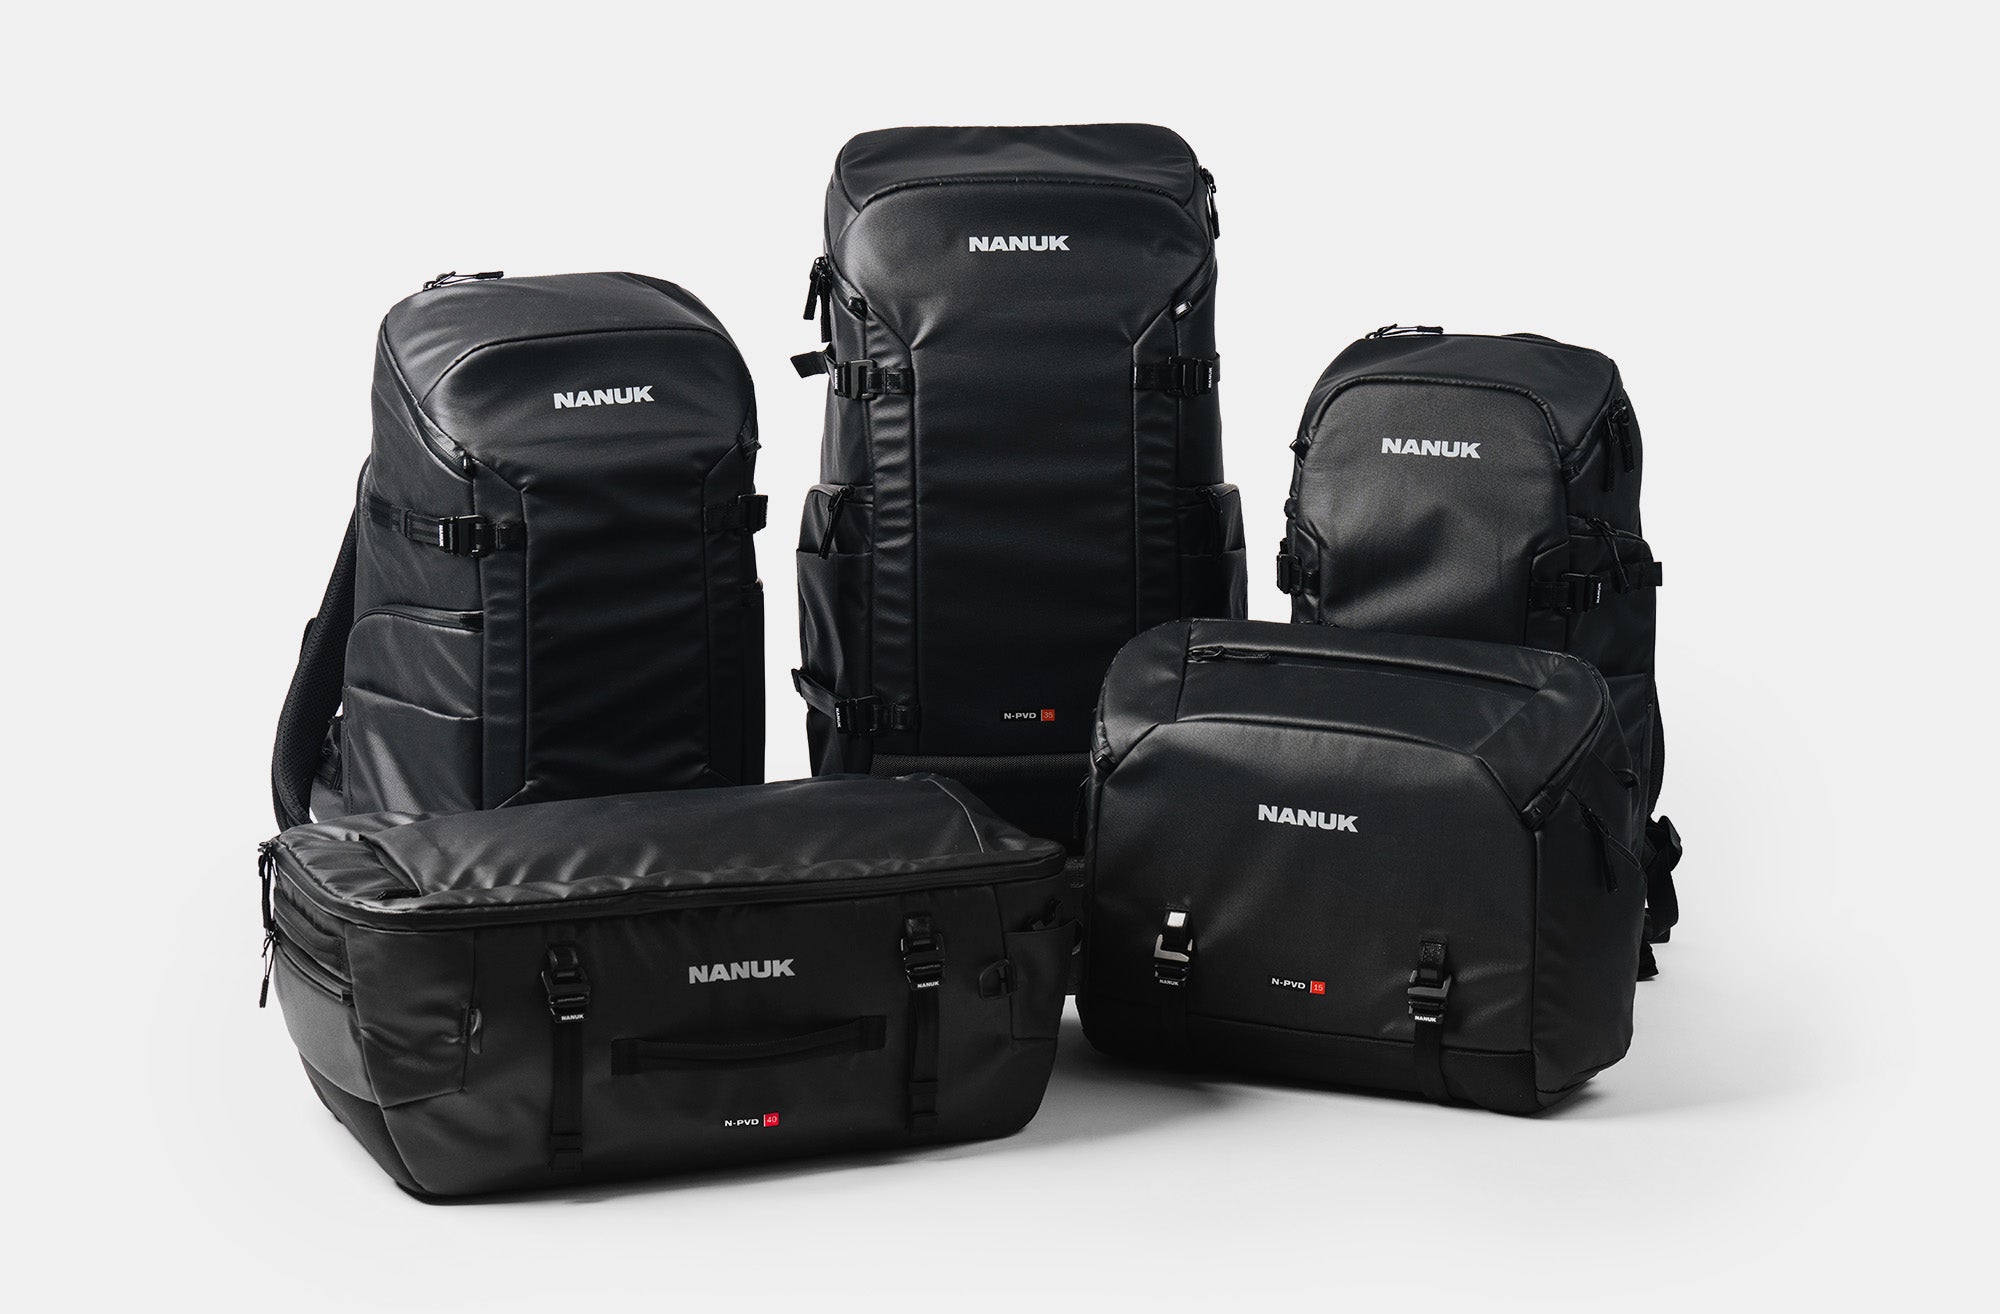 Where design meets functionality, and experience the epitome of backpack innovation. Welcome to the Full Backpack Line.